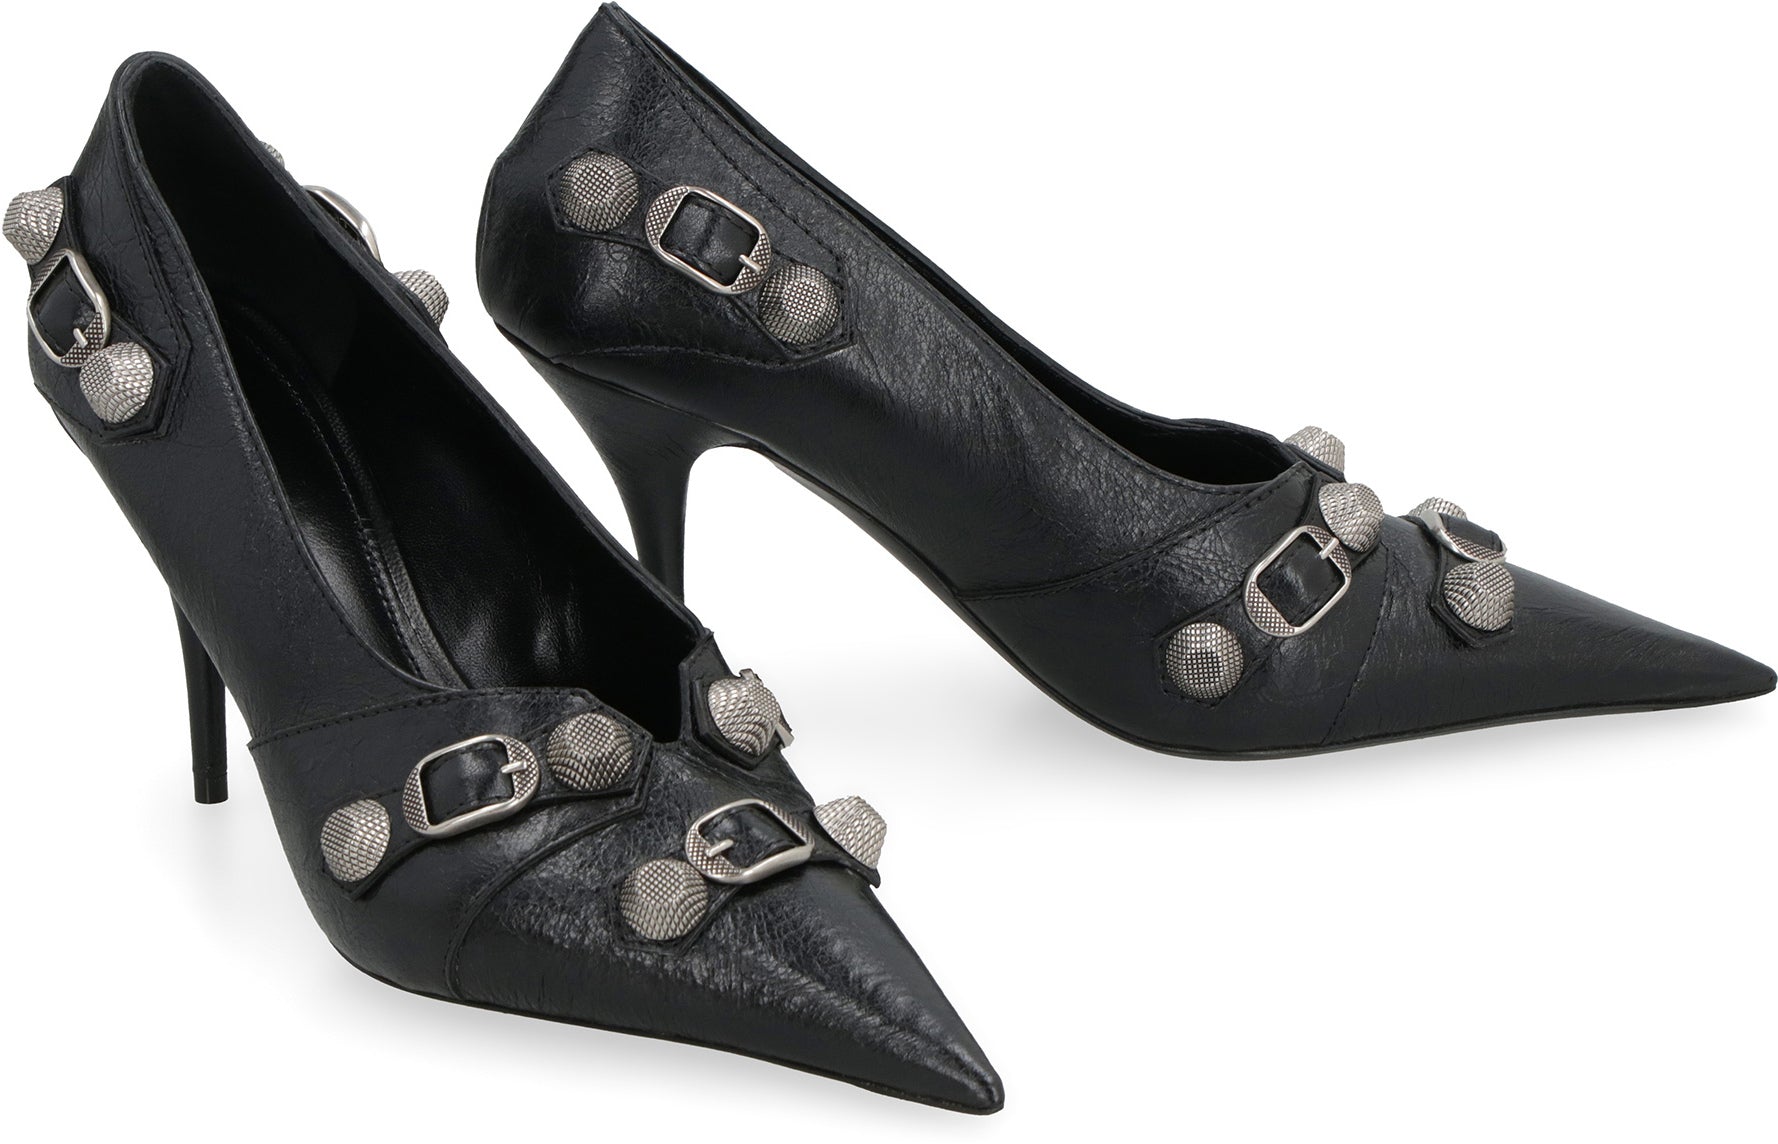 Shop Balenciaga Studded Black Leather Pumps With Pointed Toe And Covered Heel